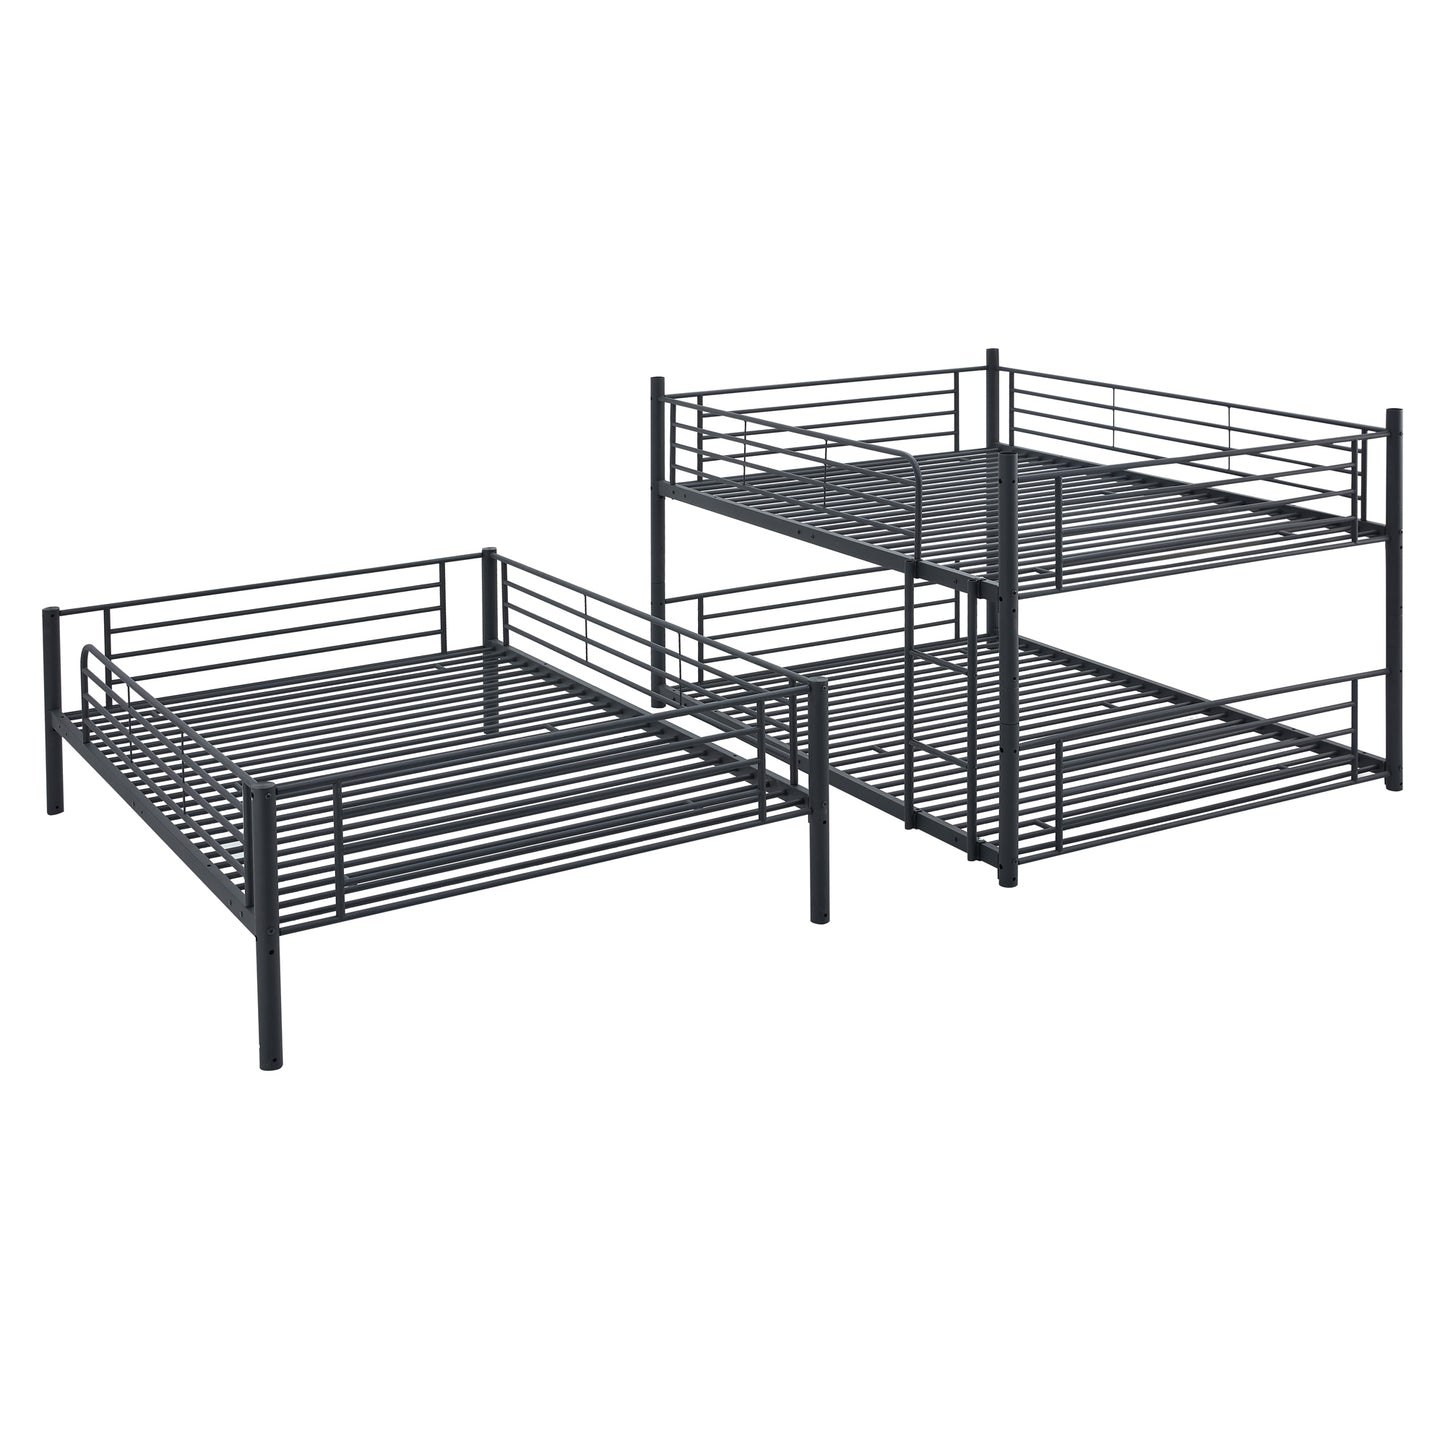 Full-Full-Full Metal Triple Bunk Bed with Built-in Ladder, Divided into Three Separate Beds, Black